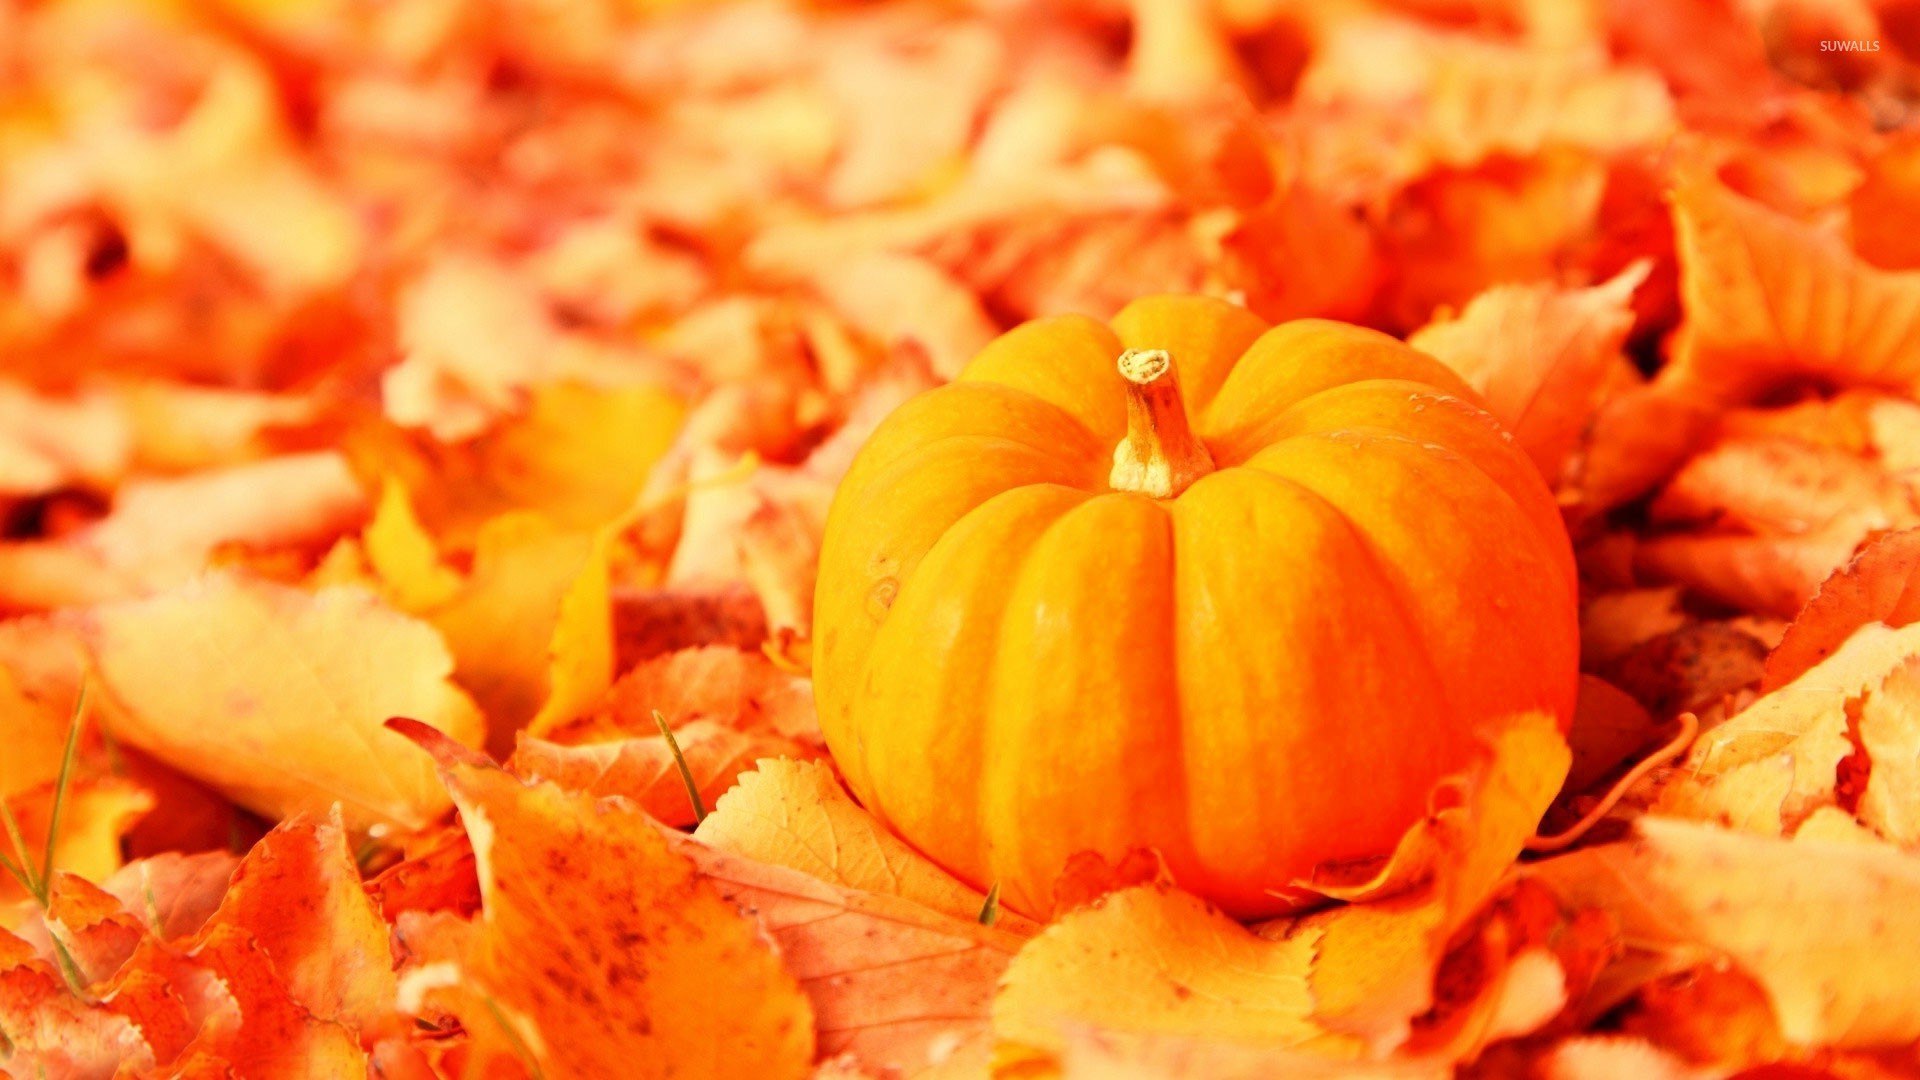 Cute Fall Wallpaper For Computers, Mobile Phones And - Fall Leaves And Pumpkins - HD Wallpaper 